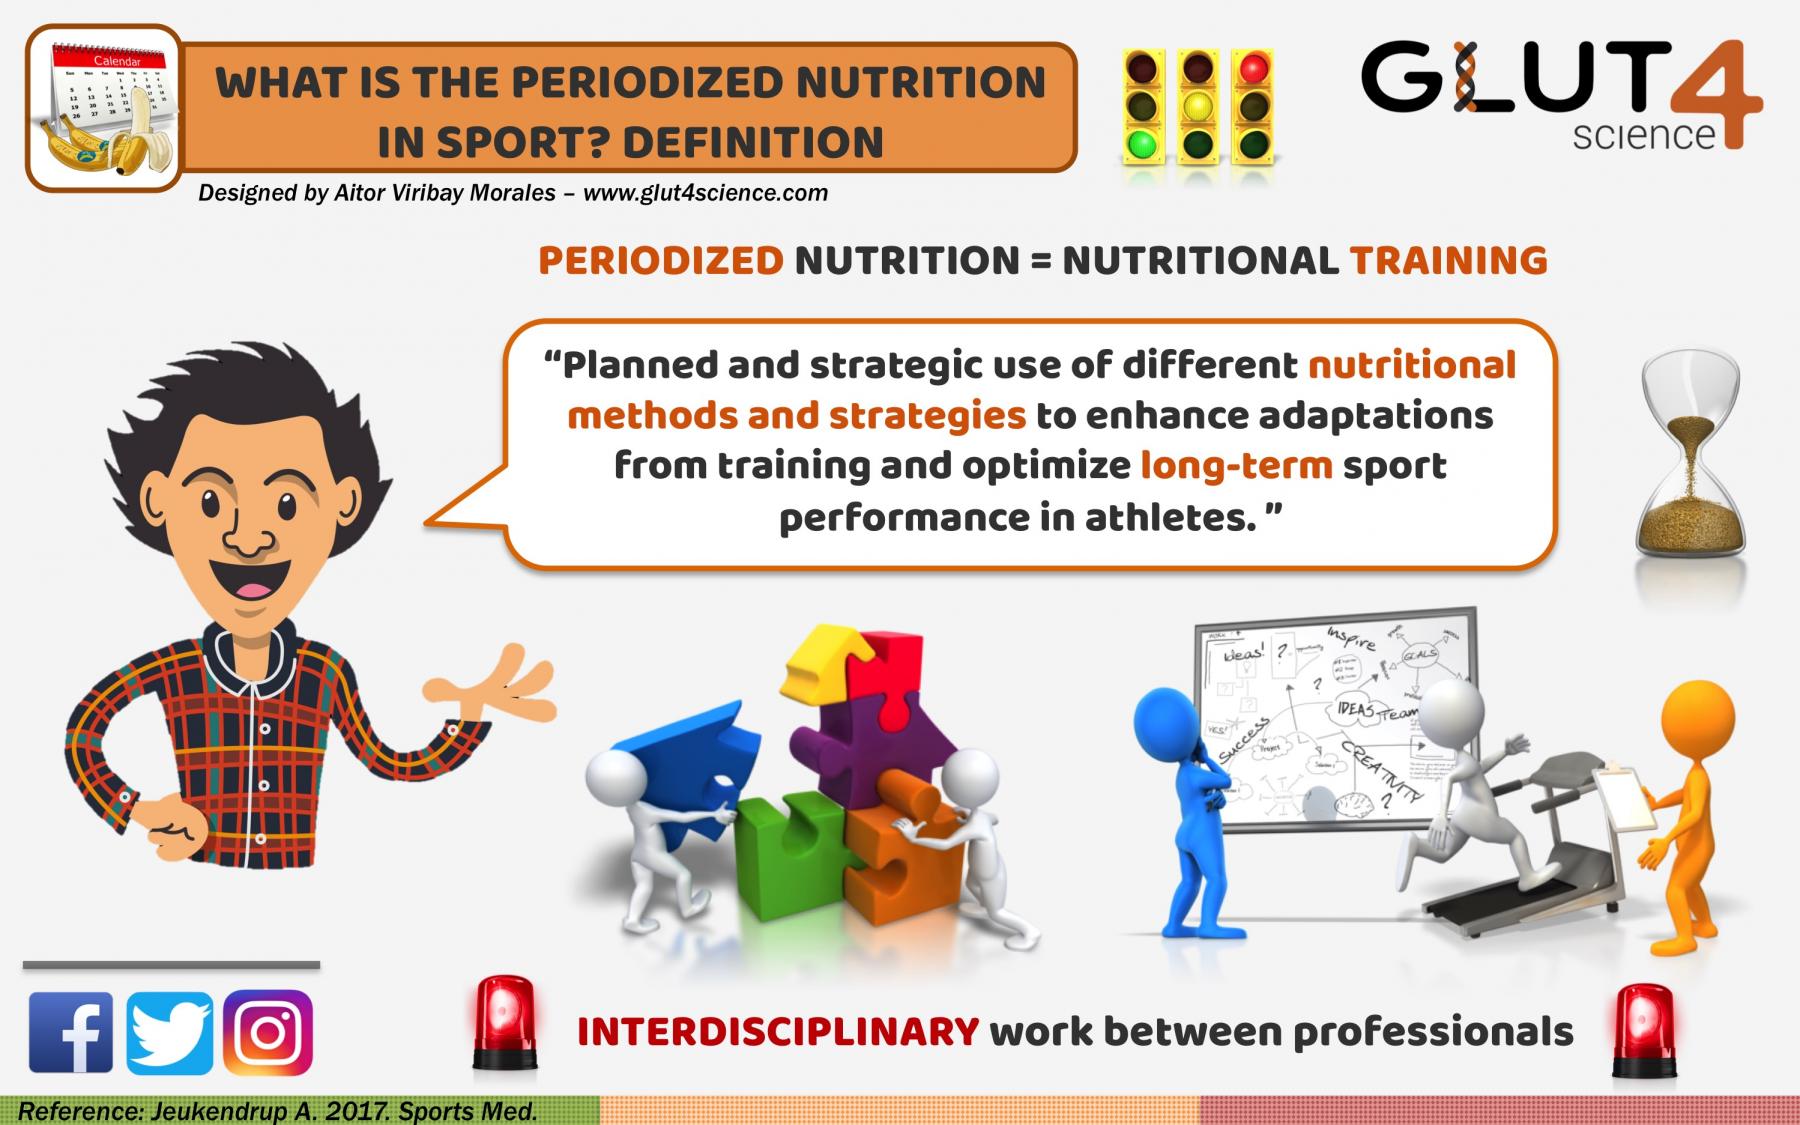 What´s the periodized nutrition?